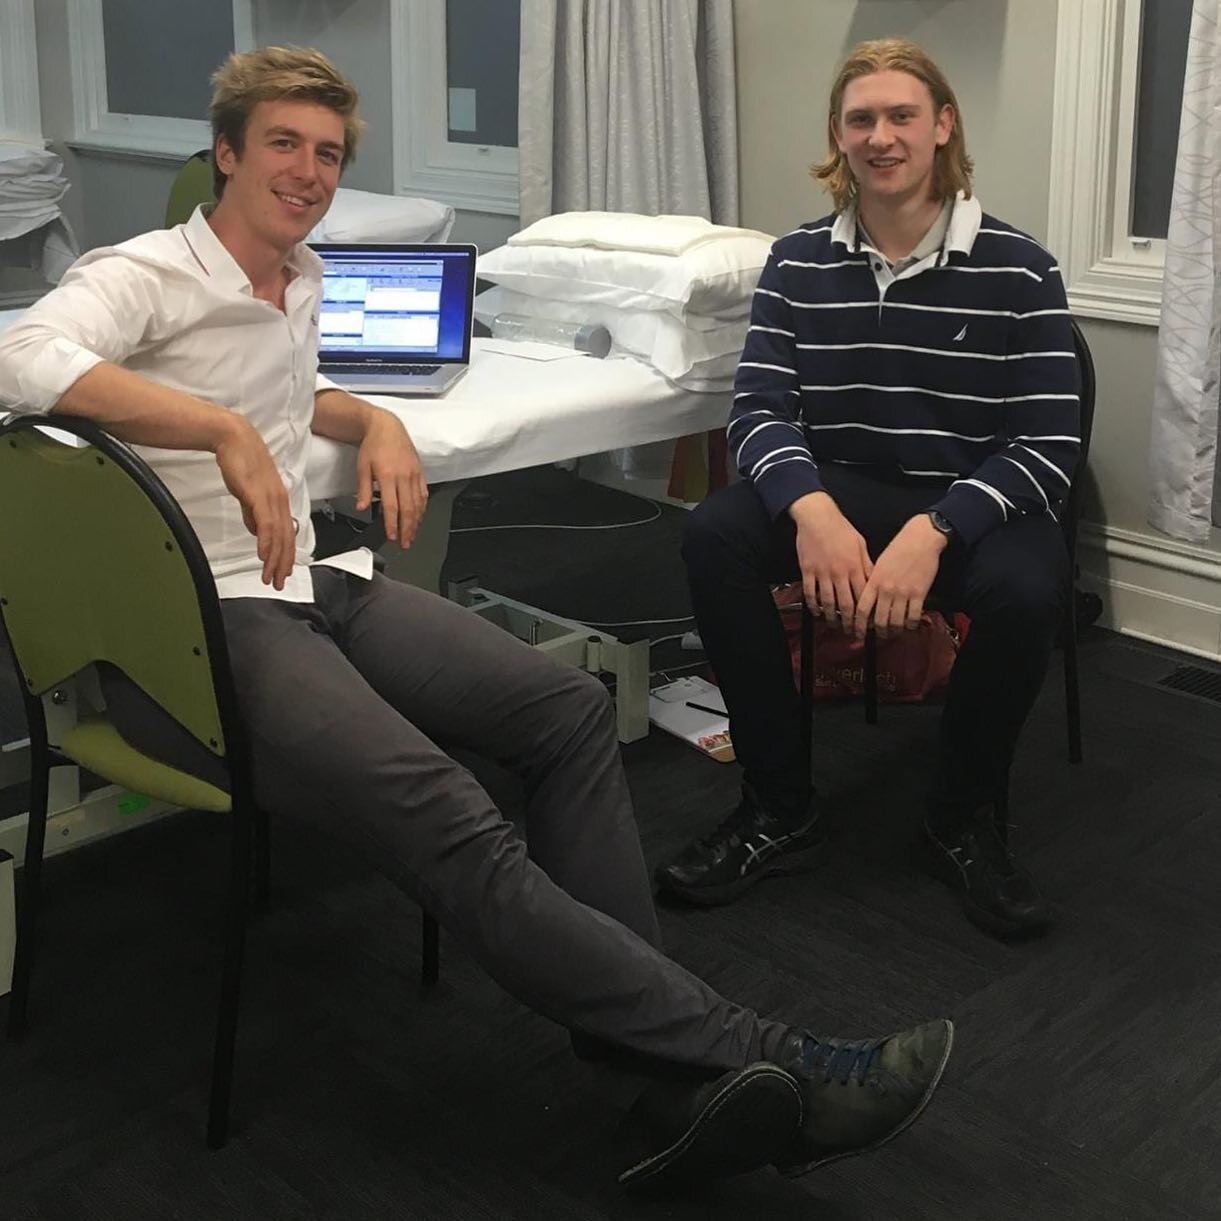 👏🏽 Congrats @_seanmcdaid for accepting a position to study physiotherapy @swinburne 

📸 Sean on Work Experience with Sam in 2016

@swin_physio #physio #physiotherapy  #physiostudent #fbf #physiotherapystudent #physioexercises